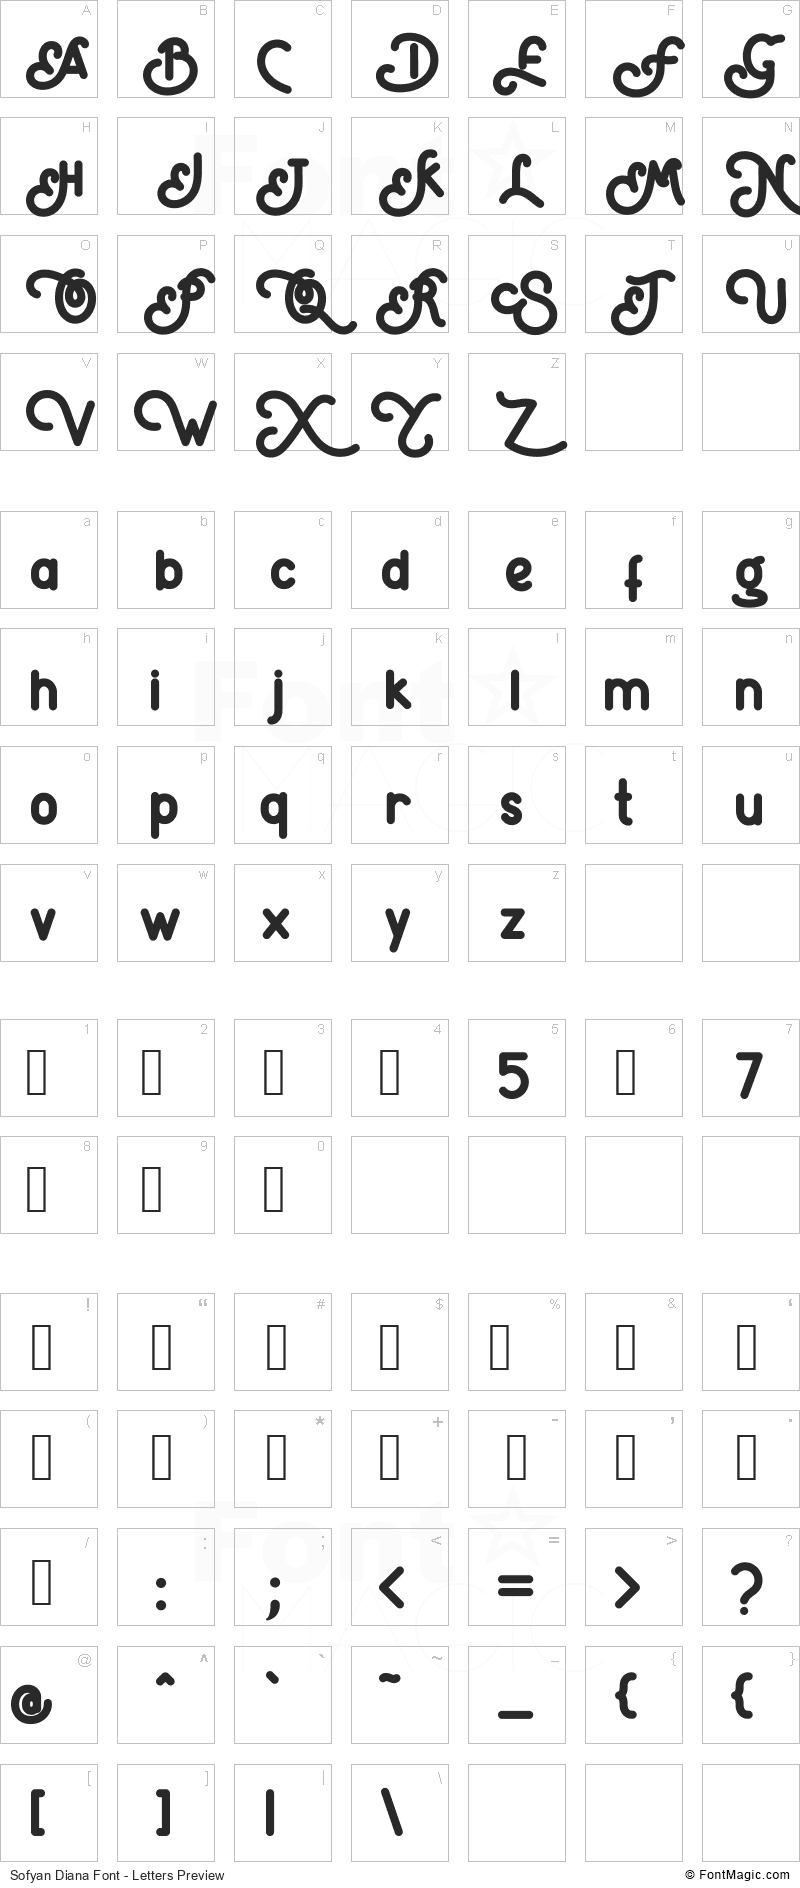 Sofyan Diana Font - All Latters Preview Chart